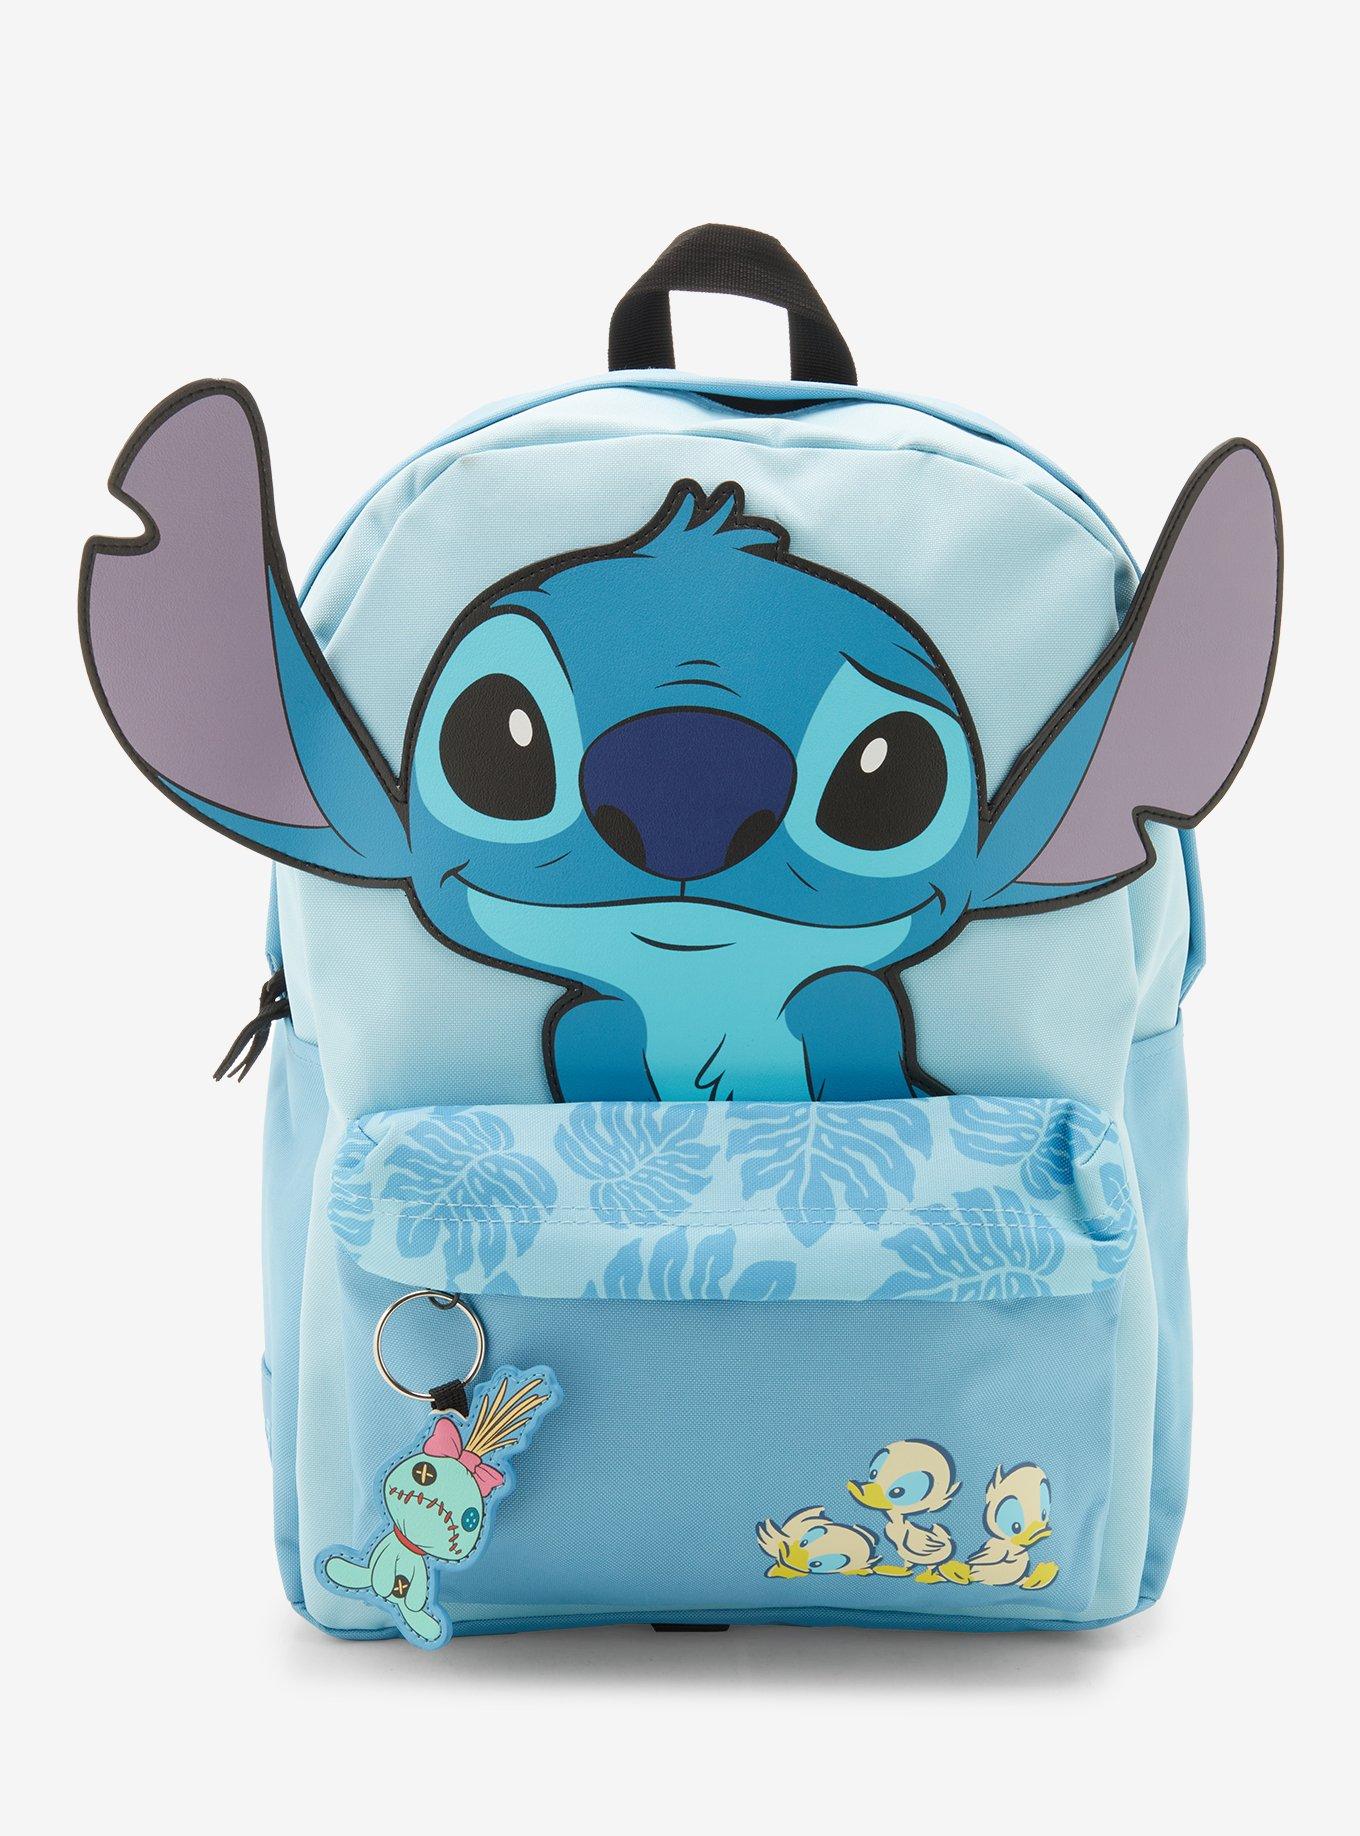 Lilo & Stitch at Hot Topic - Apparel, Books, and Collectibles